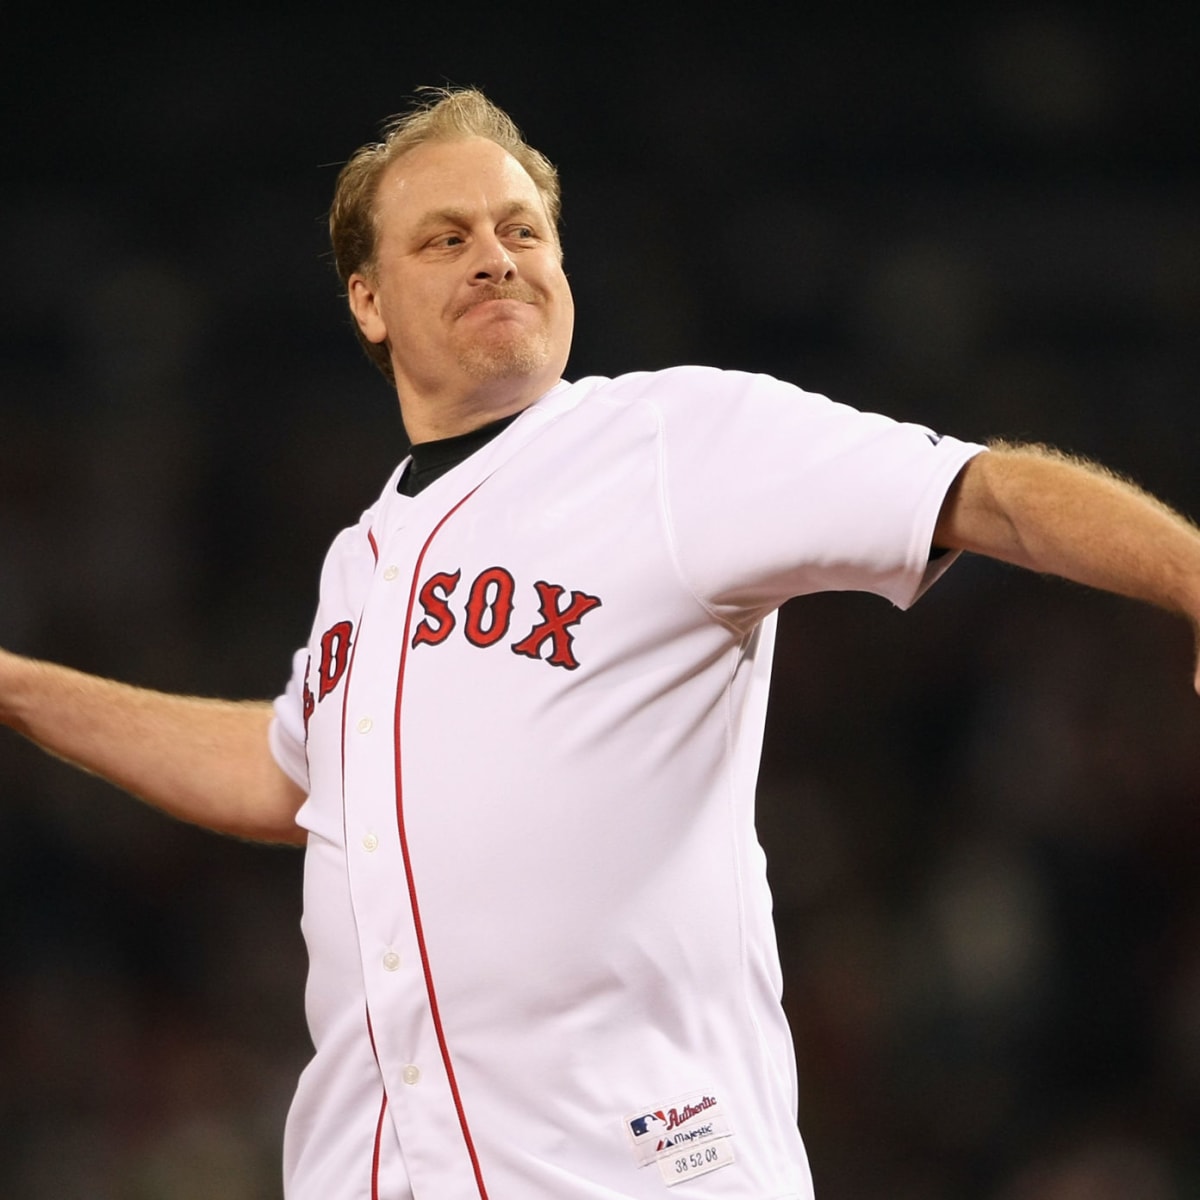 Curt Schilling Sends New Message After Hall Of Fame Vote - The